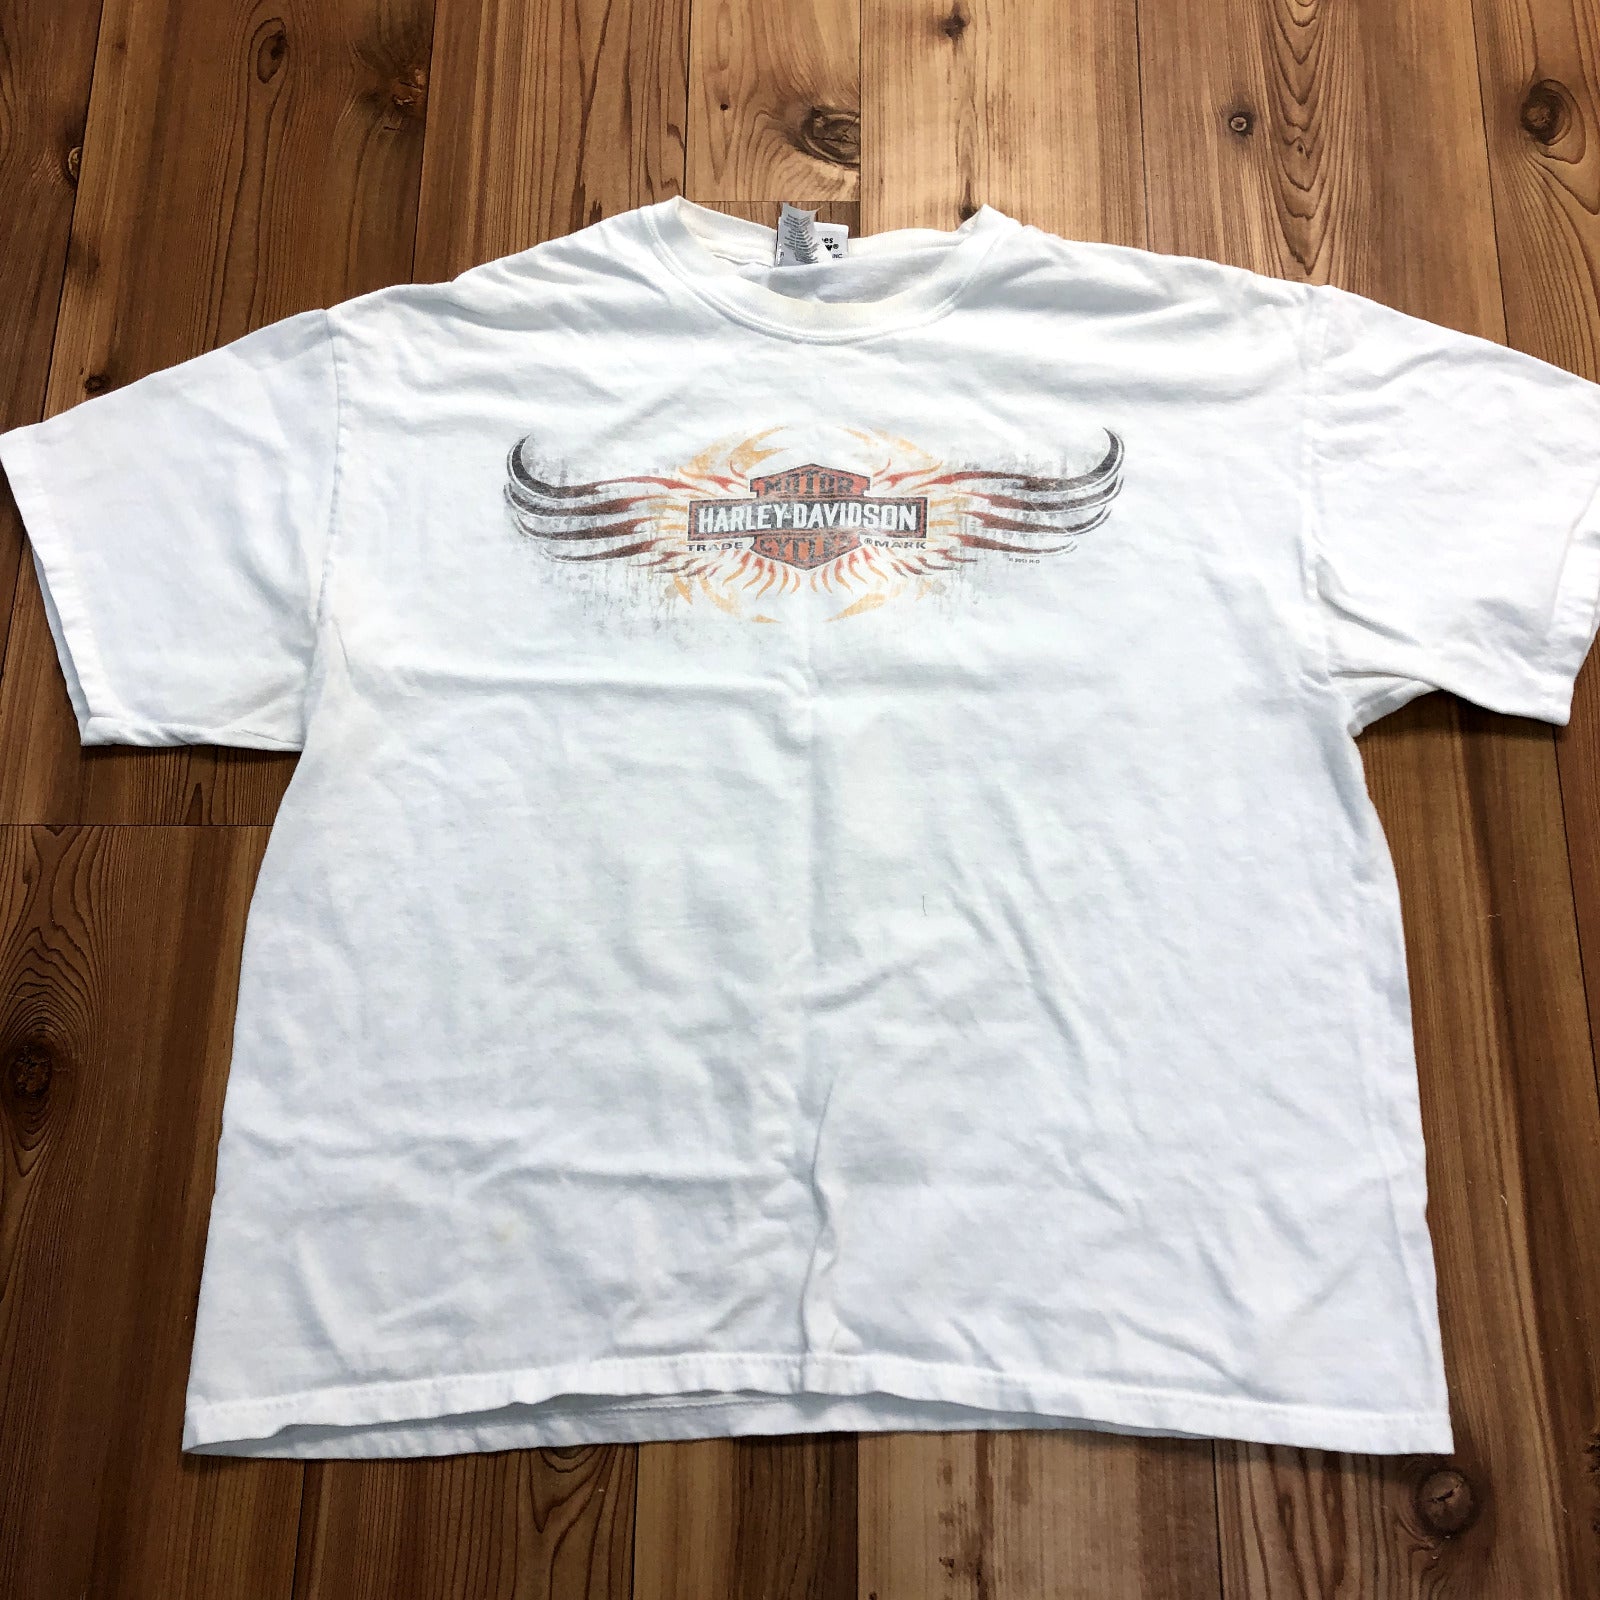 Harley Davidson Motorcycles White Temple Texas 2011 Cotton T-shirt Adult Size XL